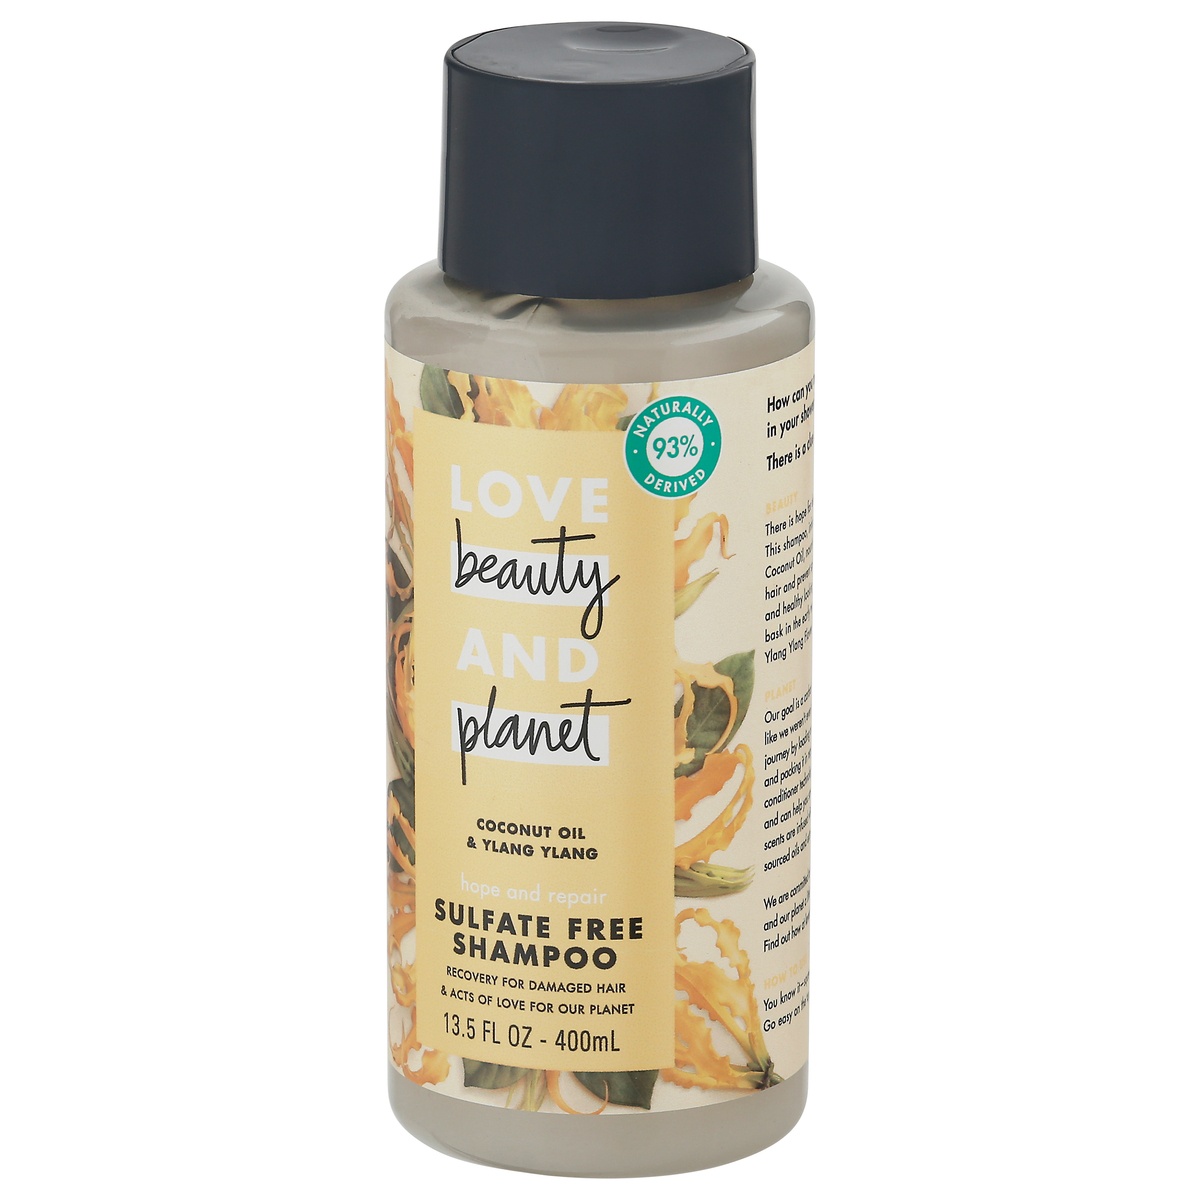 slide 3 of 10, Love Beauty and Planet Hope and Repair Coconut Oil & Ylang Ylang Shampoo, 13.5 fl oz